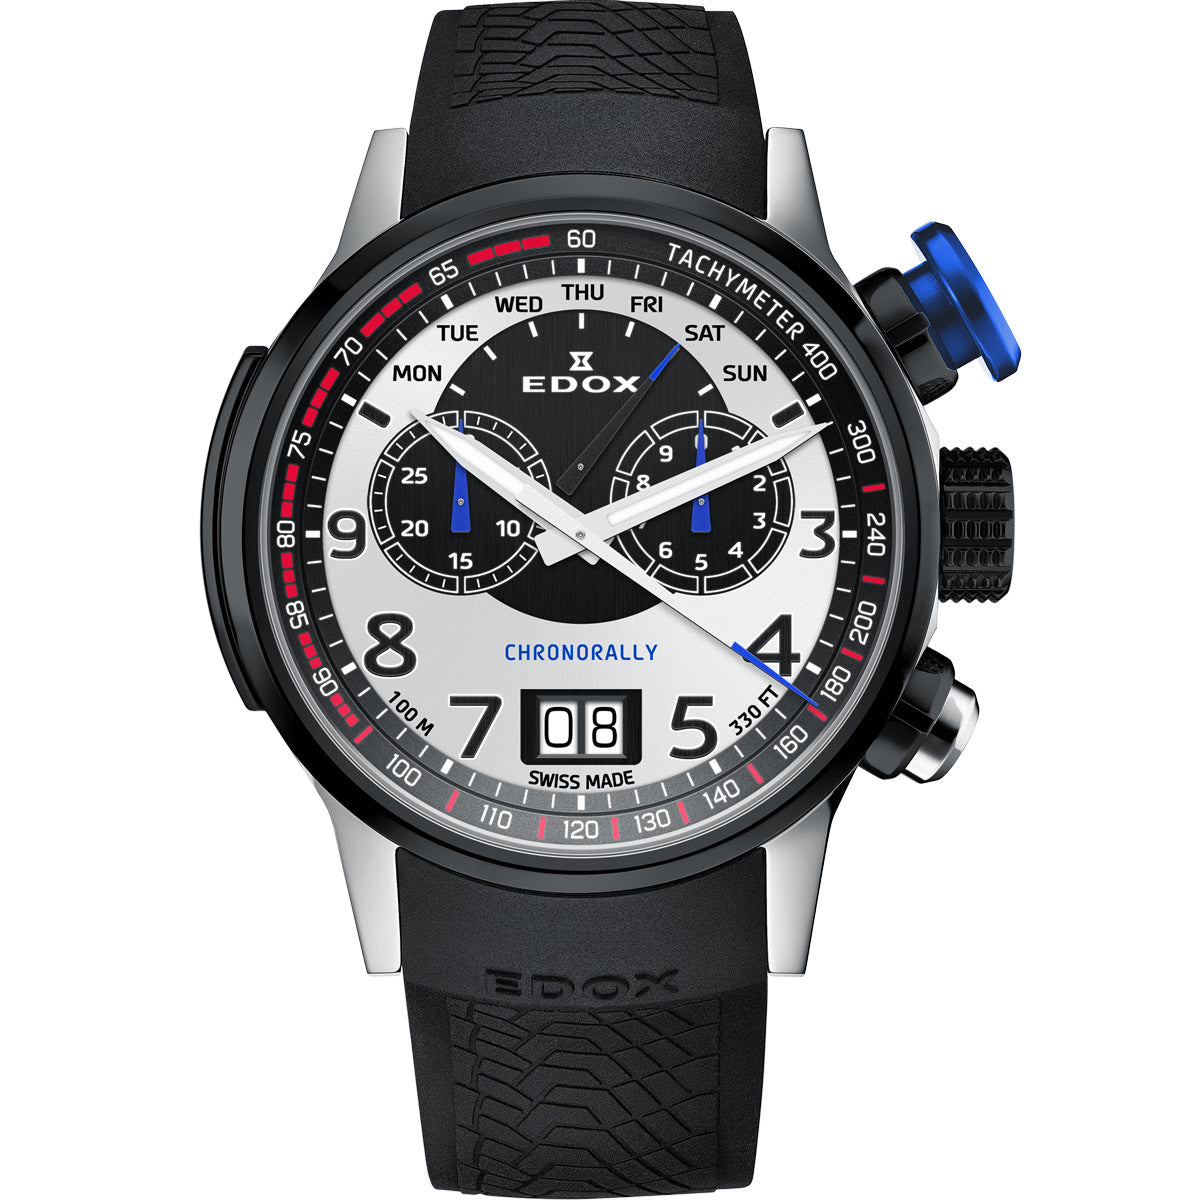 Edox - Chronorally Chronograph Limited Edition 1 of 2000 - Watch